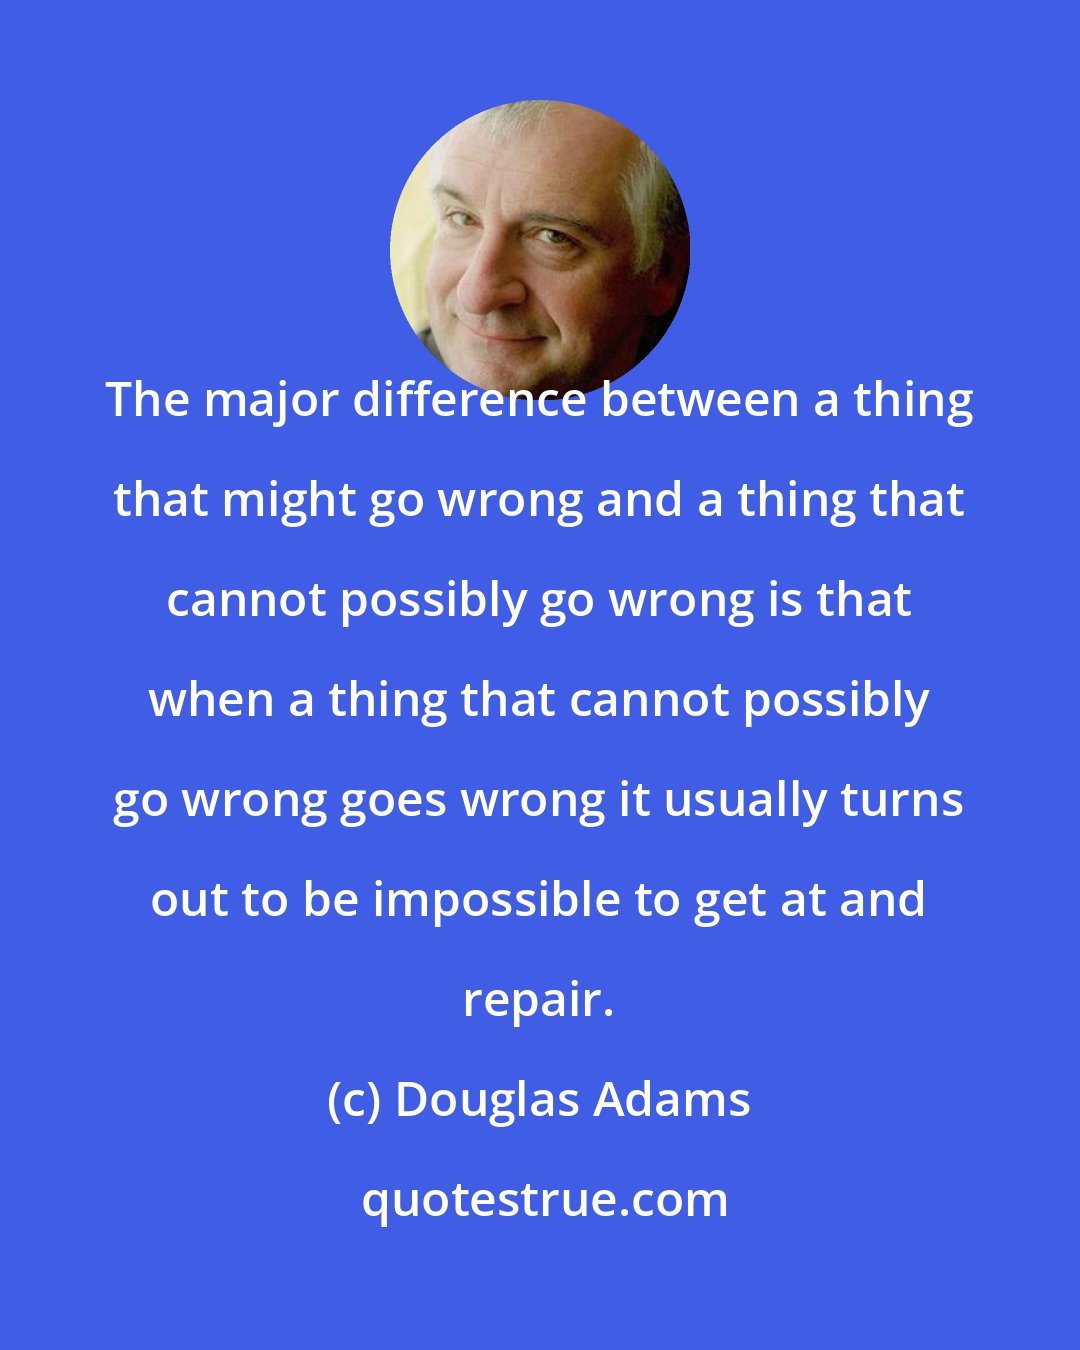 Douglas Adams: The major difference between a thing that might go wrong and a thing that cannot possibly go wrong is that when a thing that cannot possibly go wrong goes wrong it usually turns out to be impossible to get at and repair.